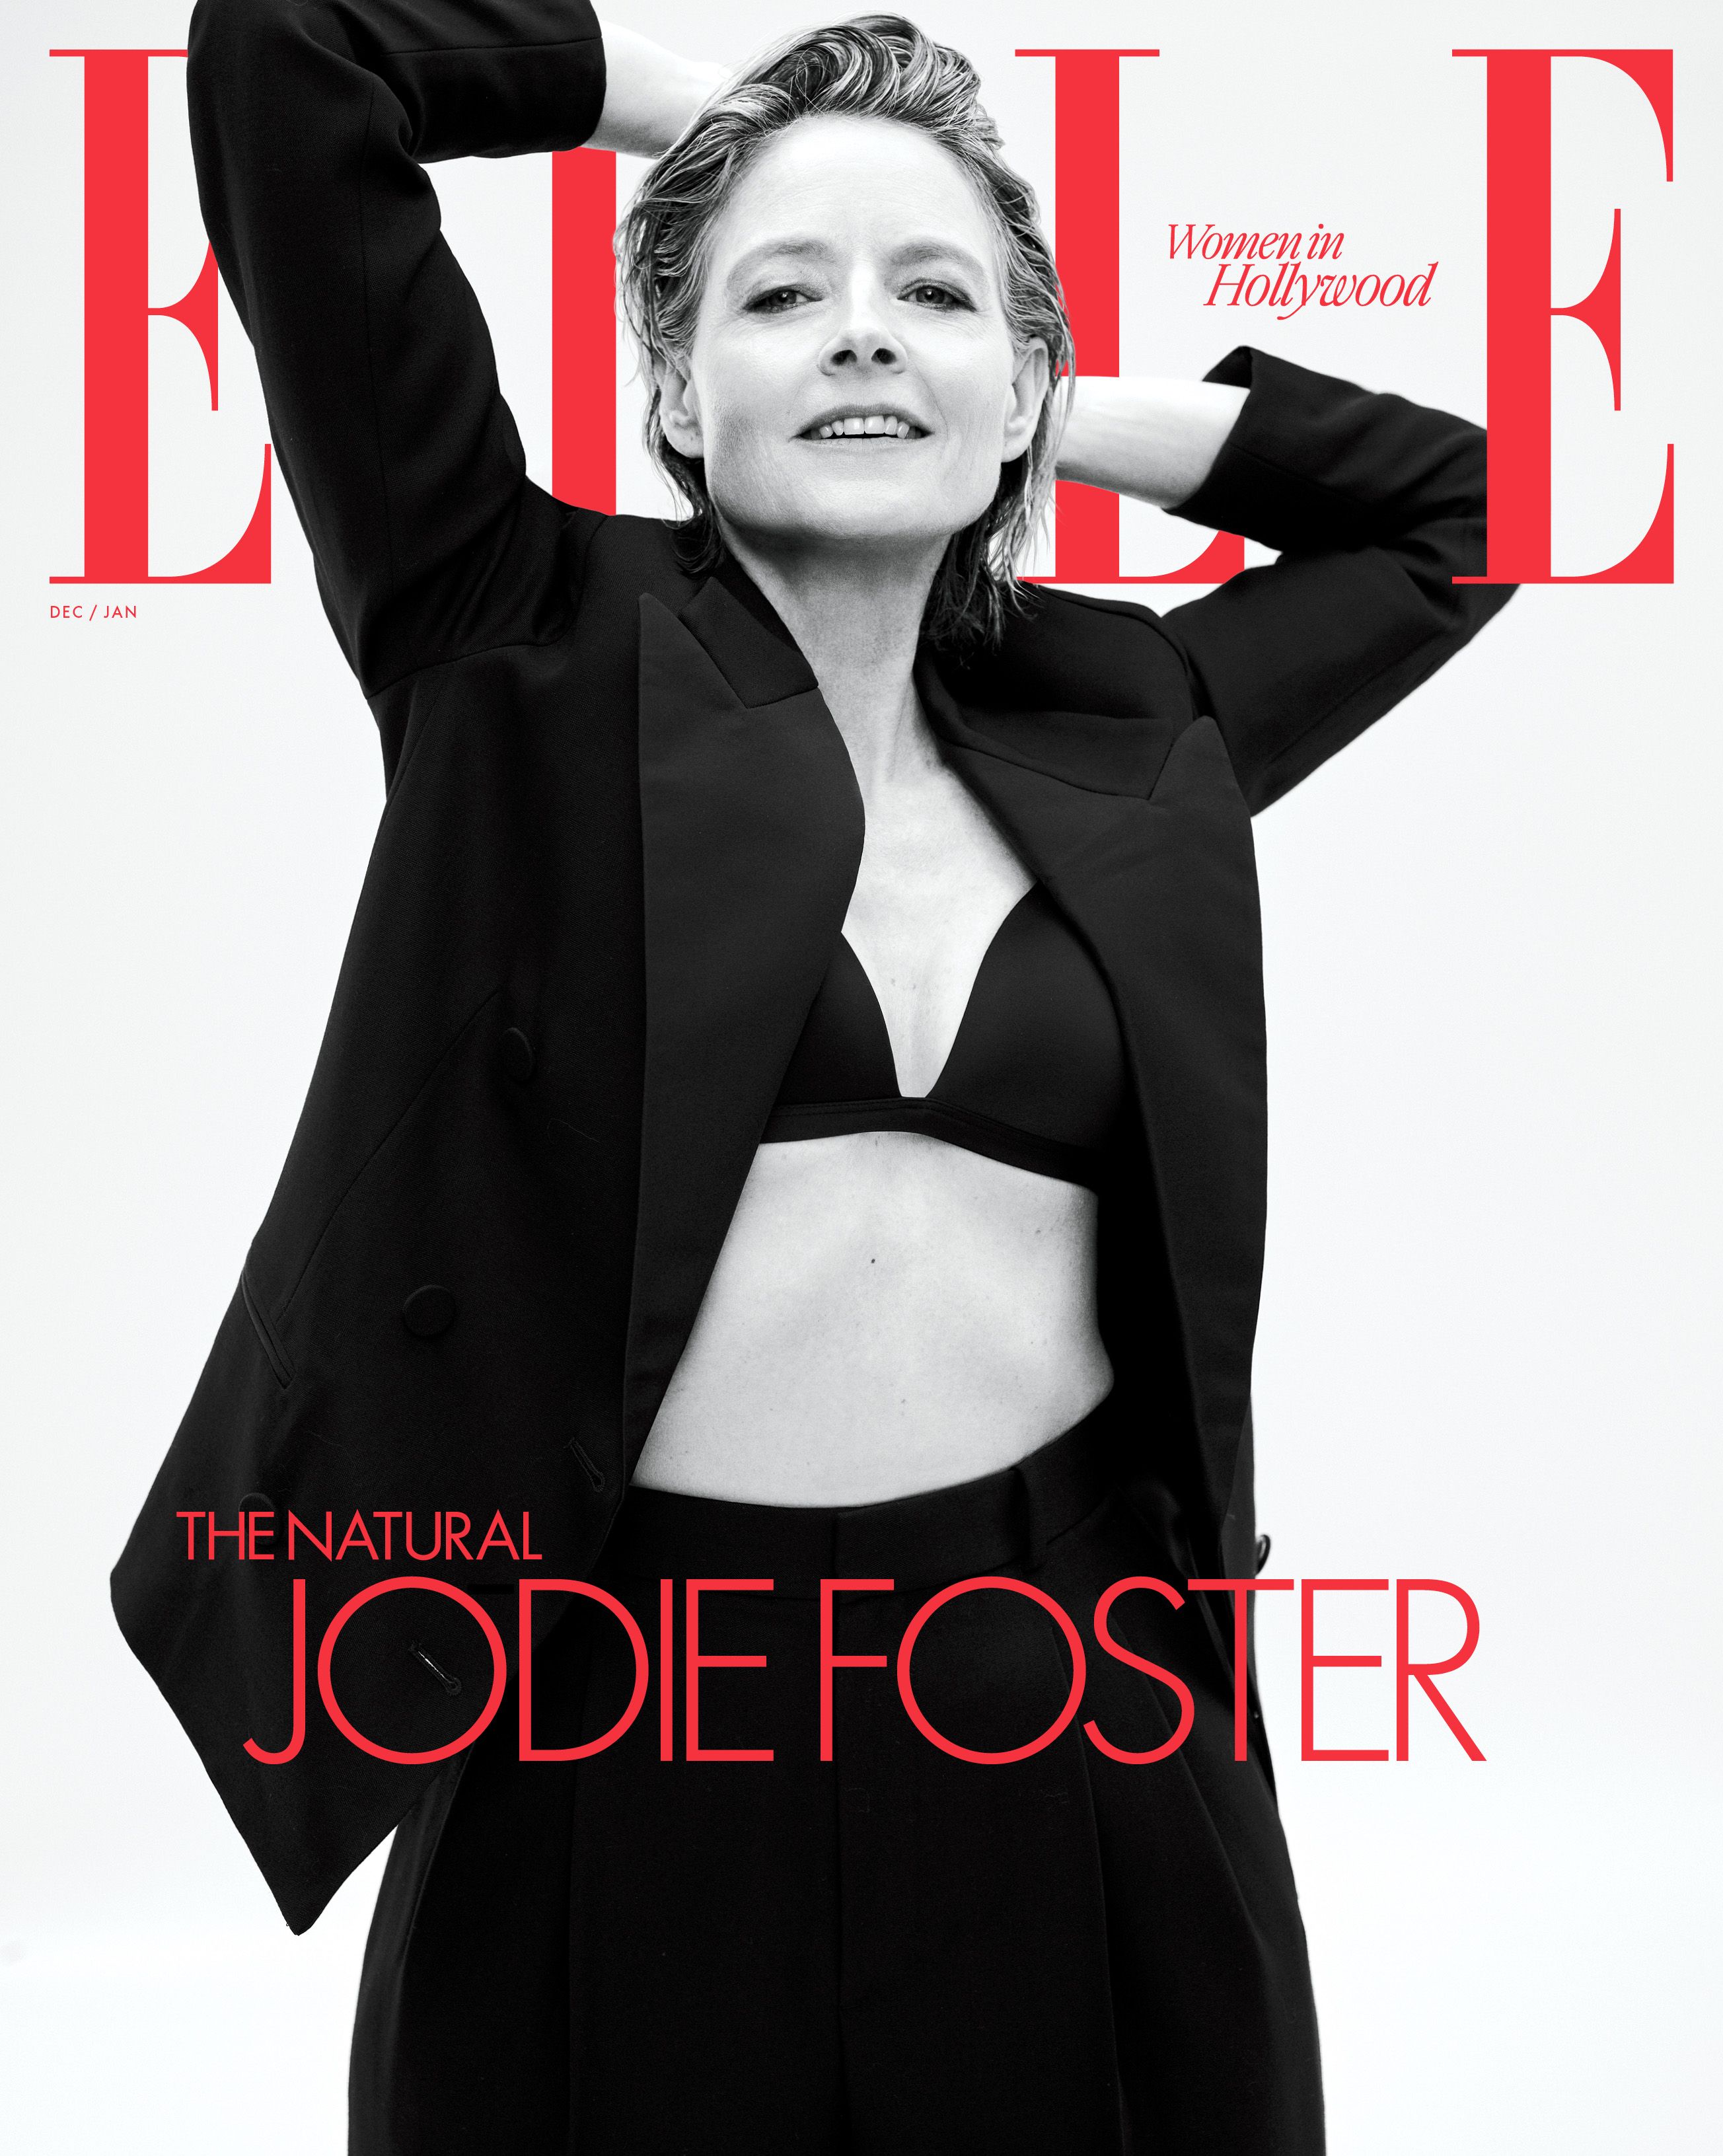 The Curious, Courageous Career of Jodie Foster - The Ringer